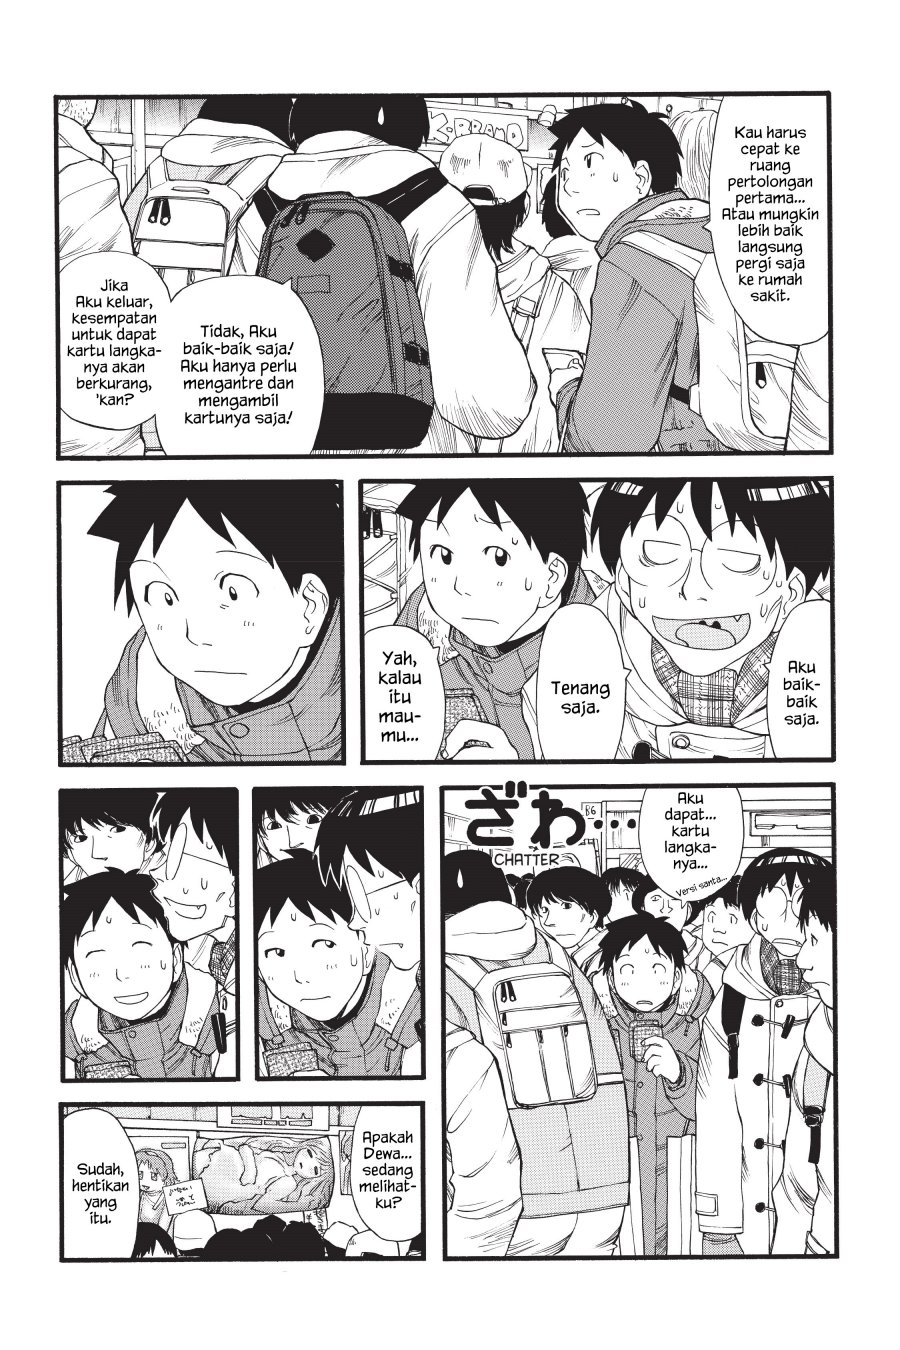 Genshiken – The Society for the Study of Modern Visual Culture Chapter 09 Image 14